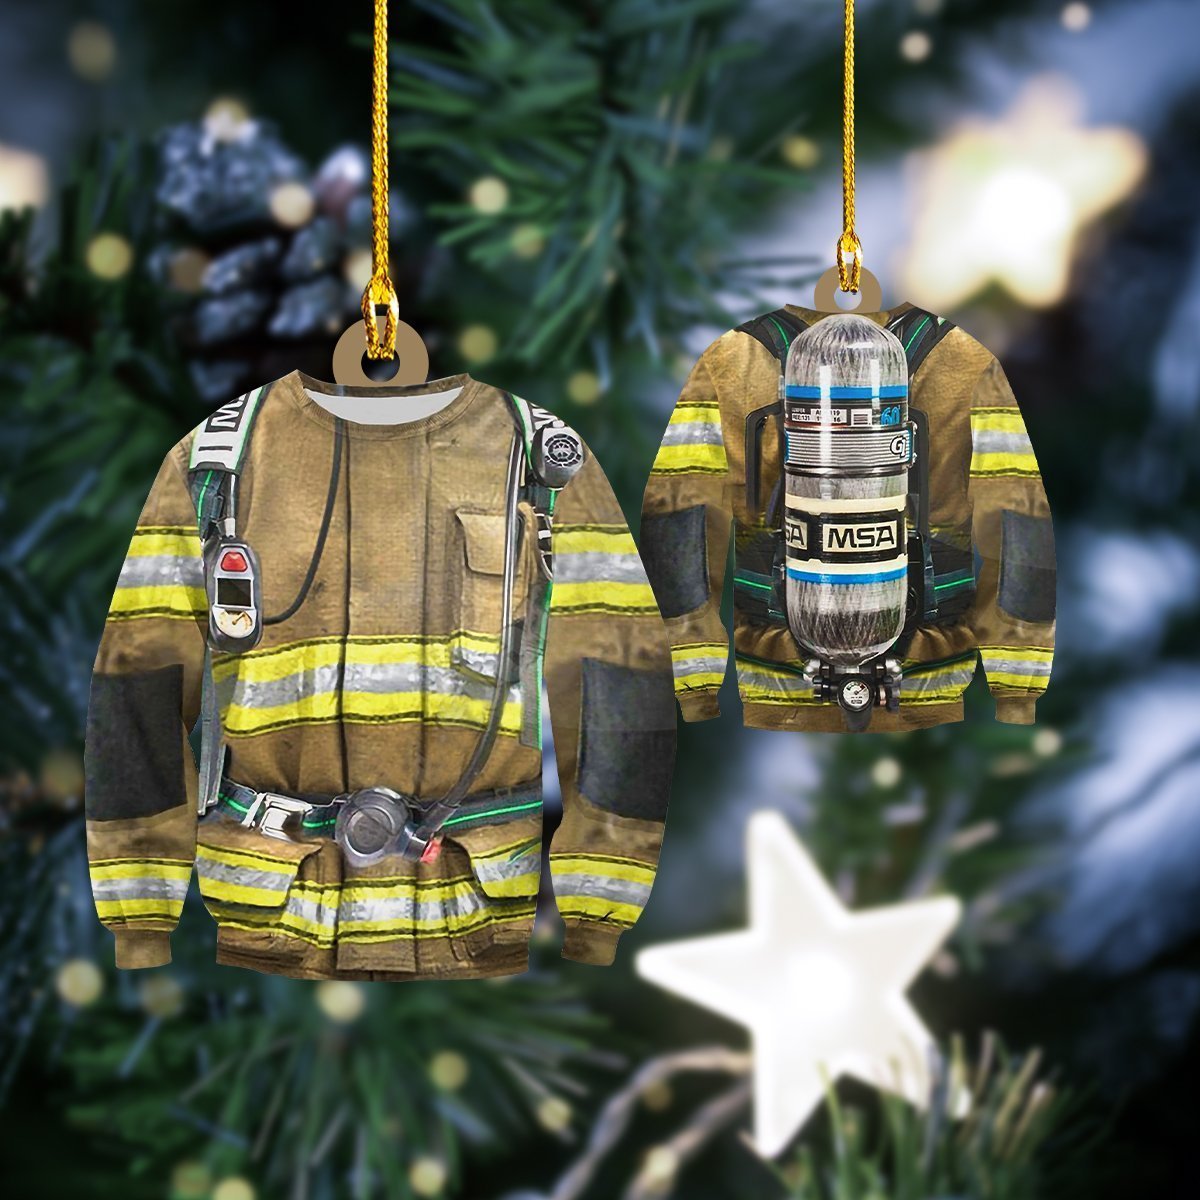 FIREFIGHTER - Shaped Ornament - Nmd Car Ornament